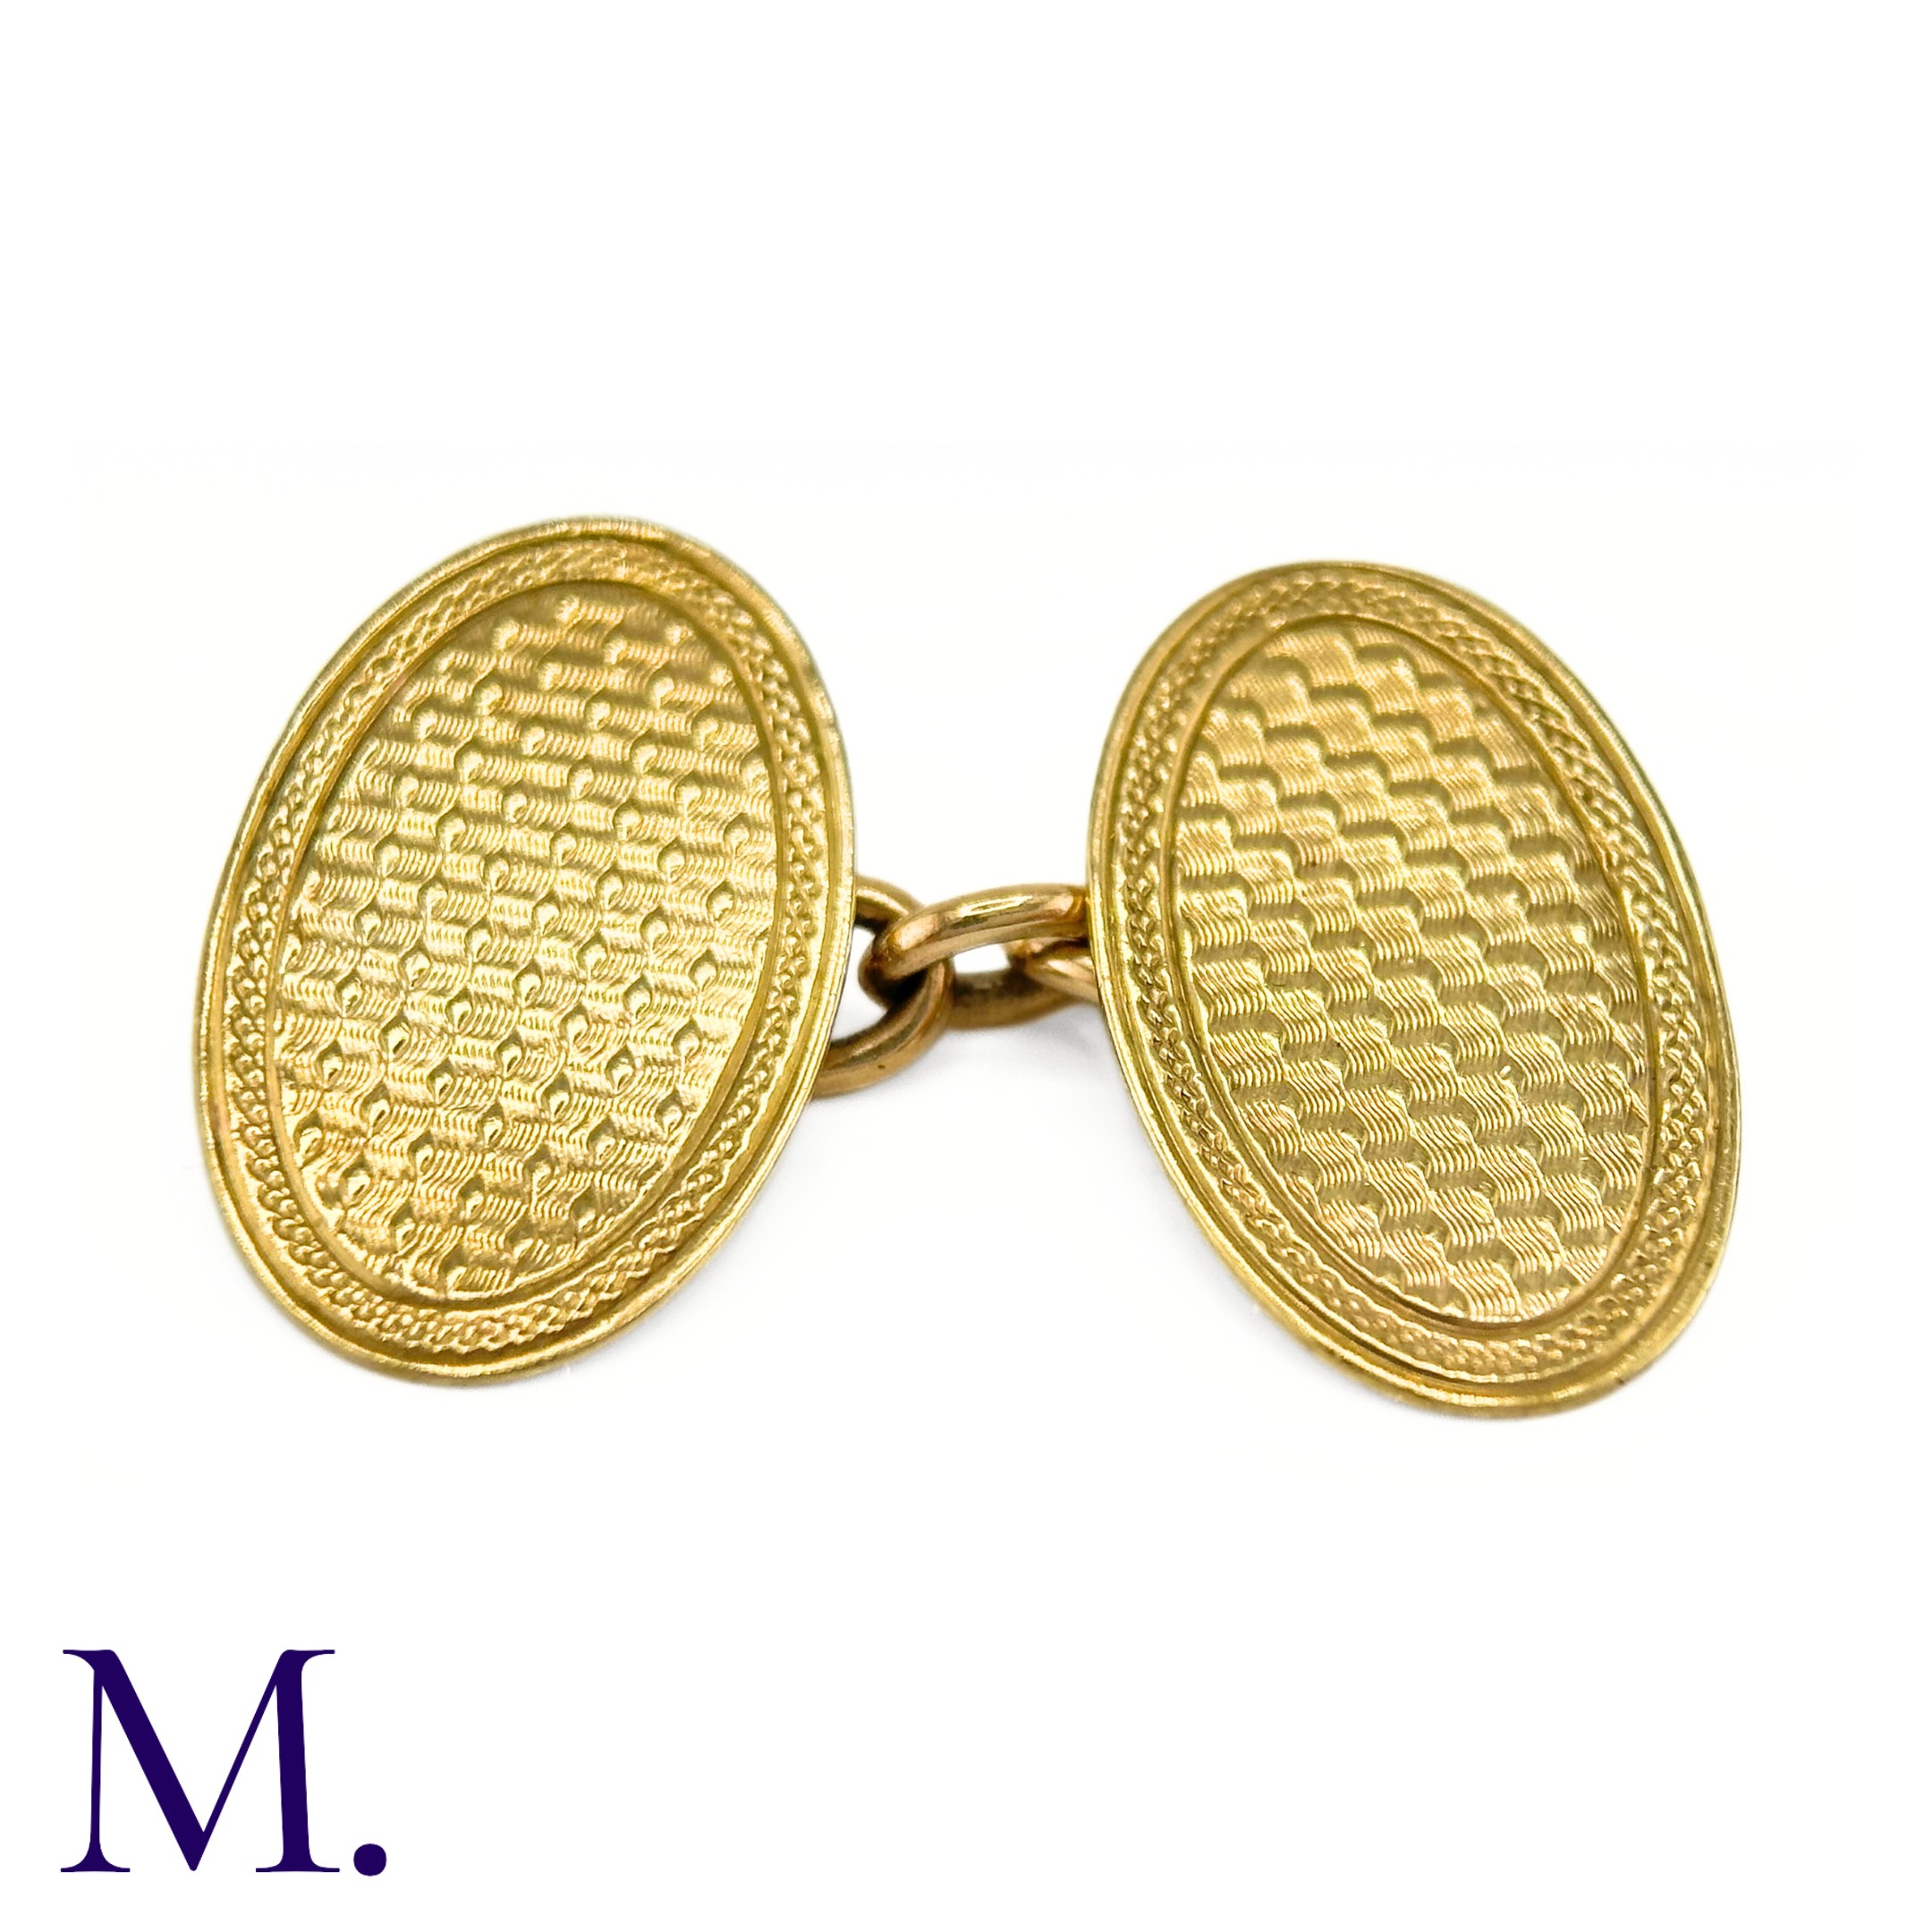 NO RESERVE - A Pair of 9ct Gold Cufflinks The 9ct yellow gold cufflinks are oval in shape with chain - Image 2 of 4